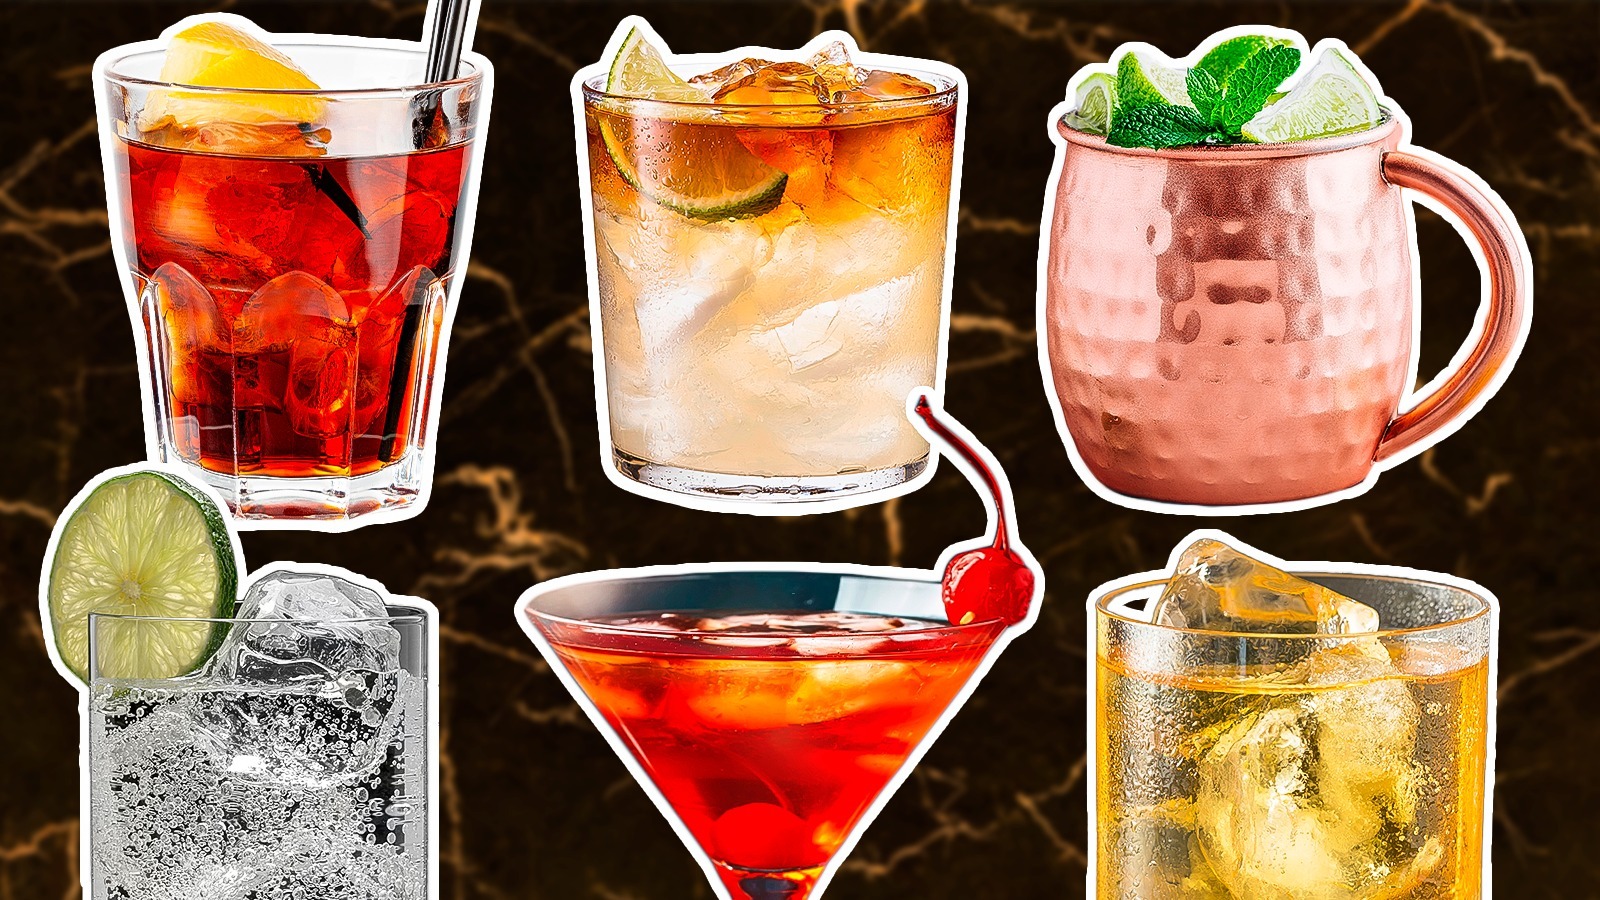 Types of Drinking Glasses for Your Next Cocktail Party - Invaluable